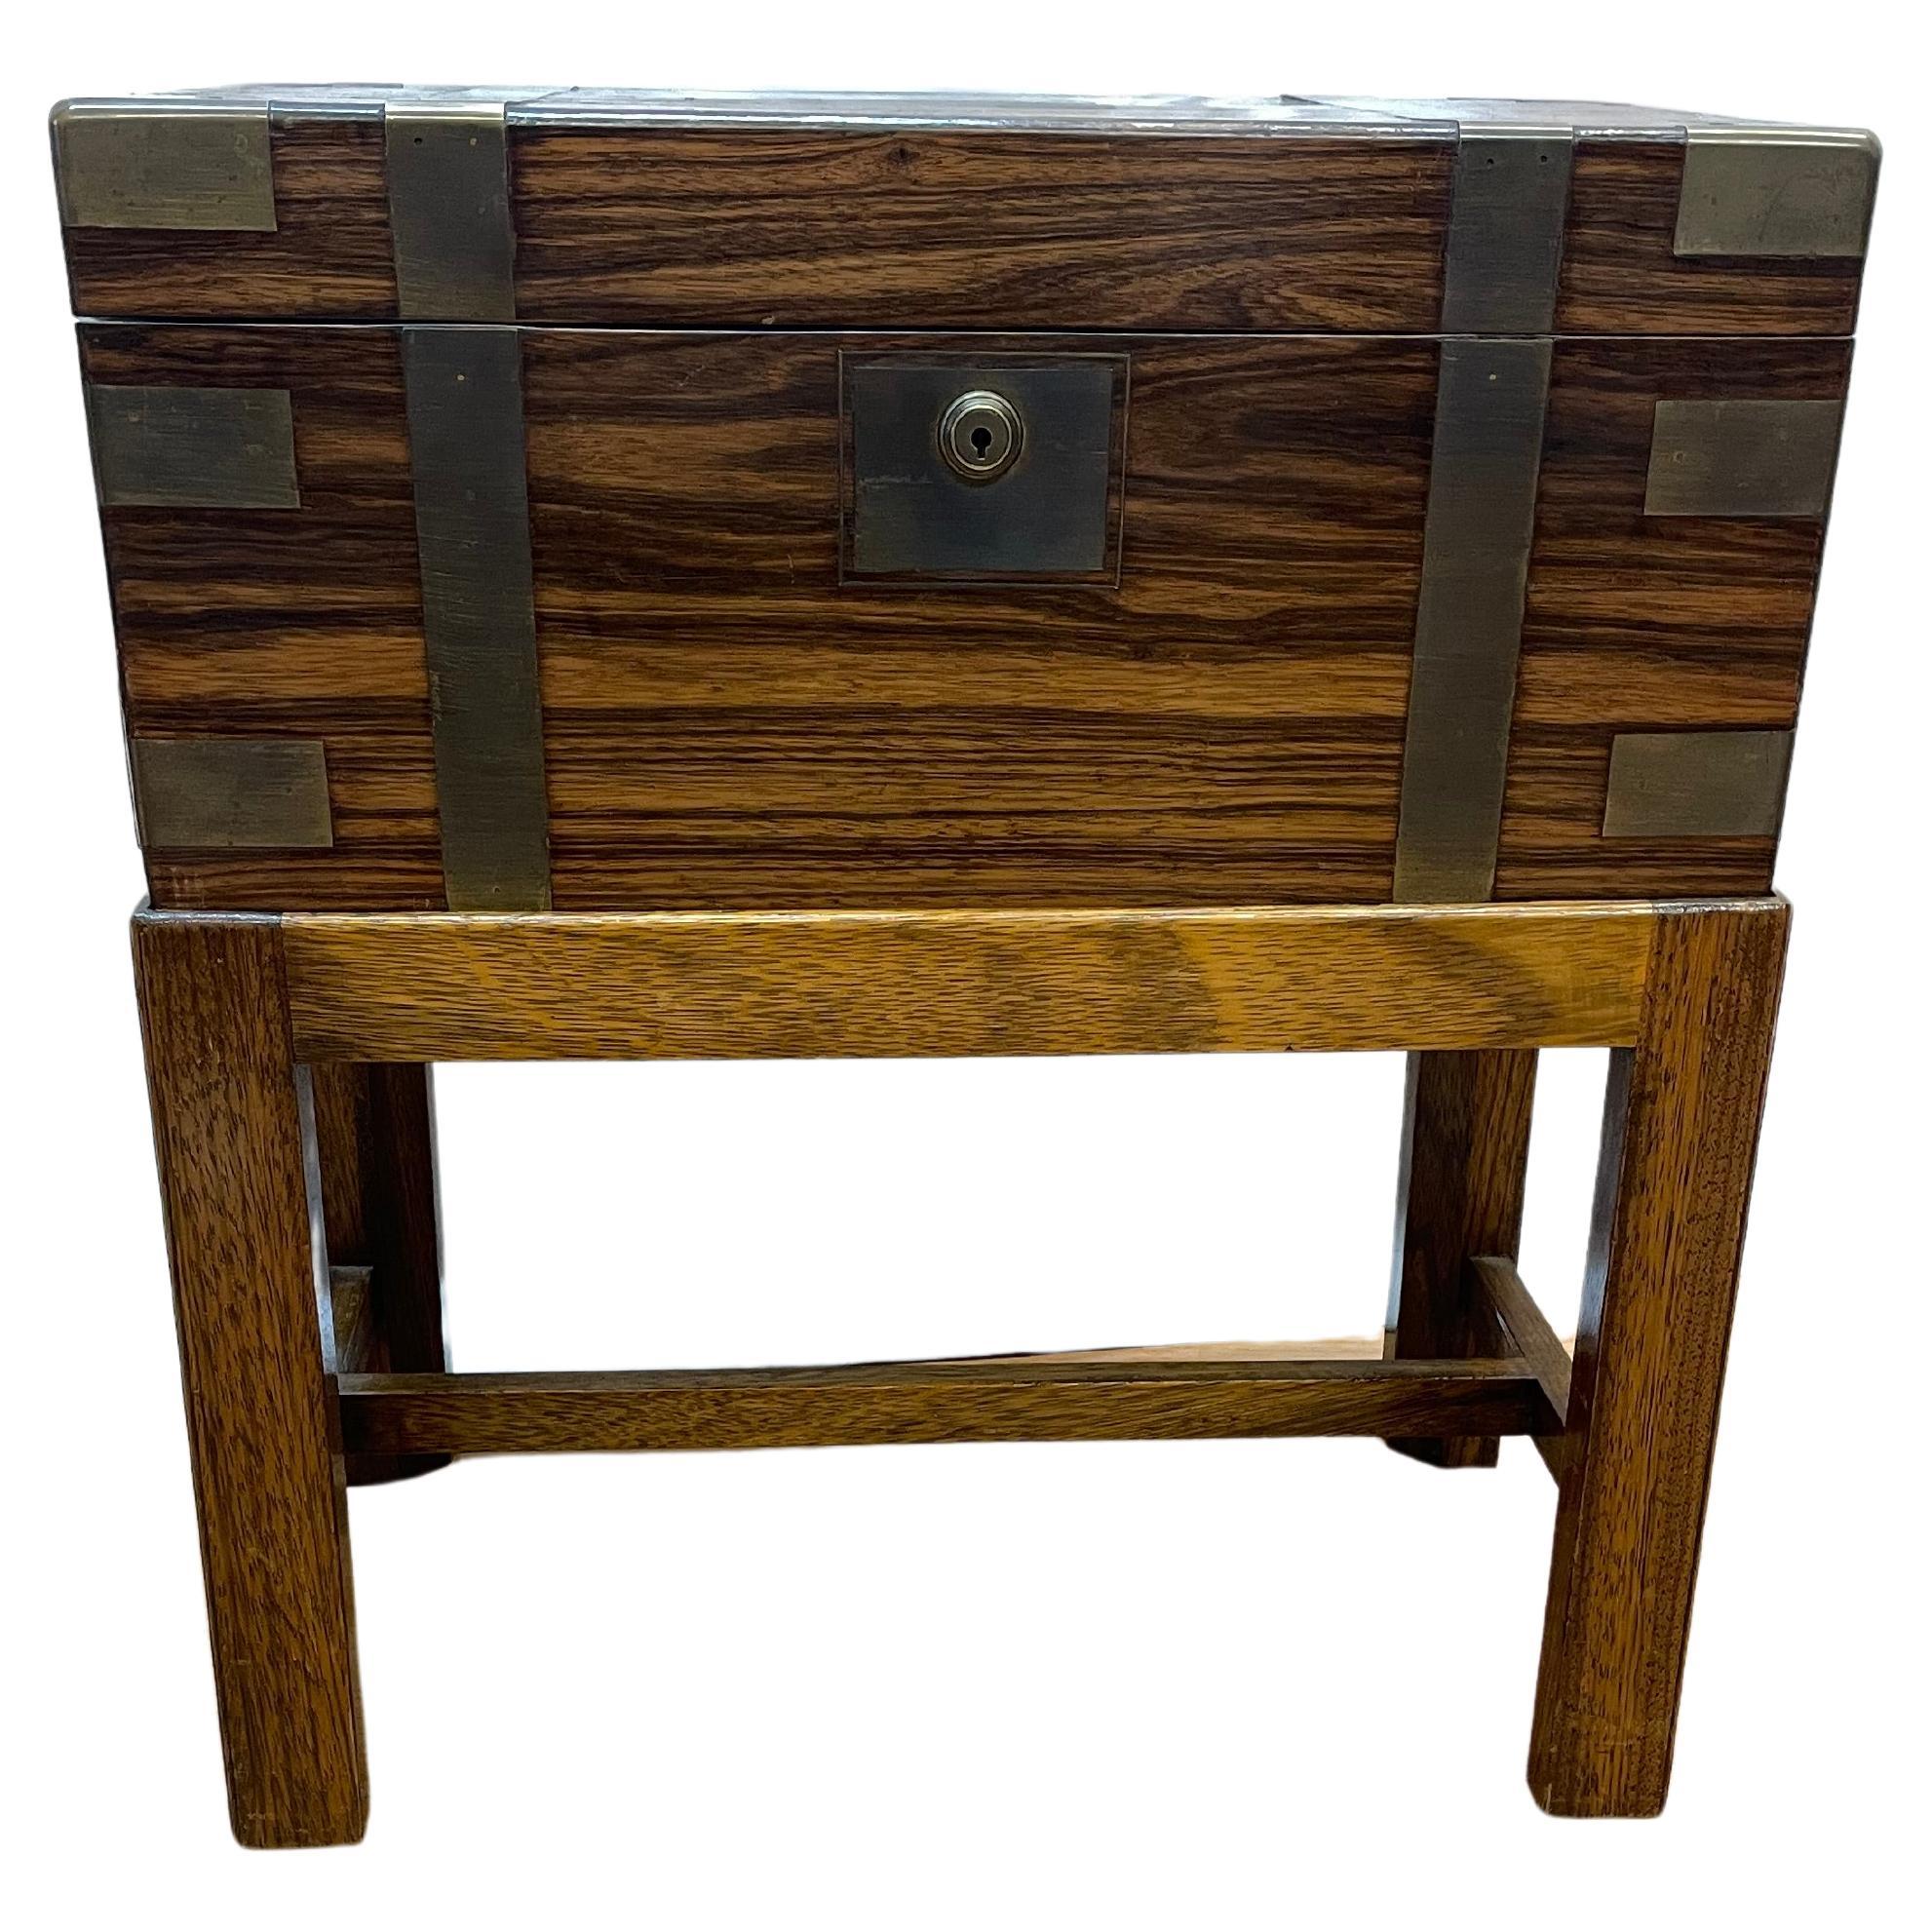 19th century campaign Reading desk on later stand